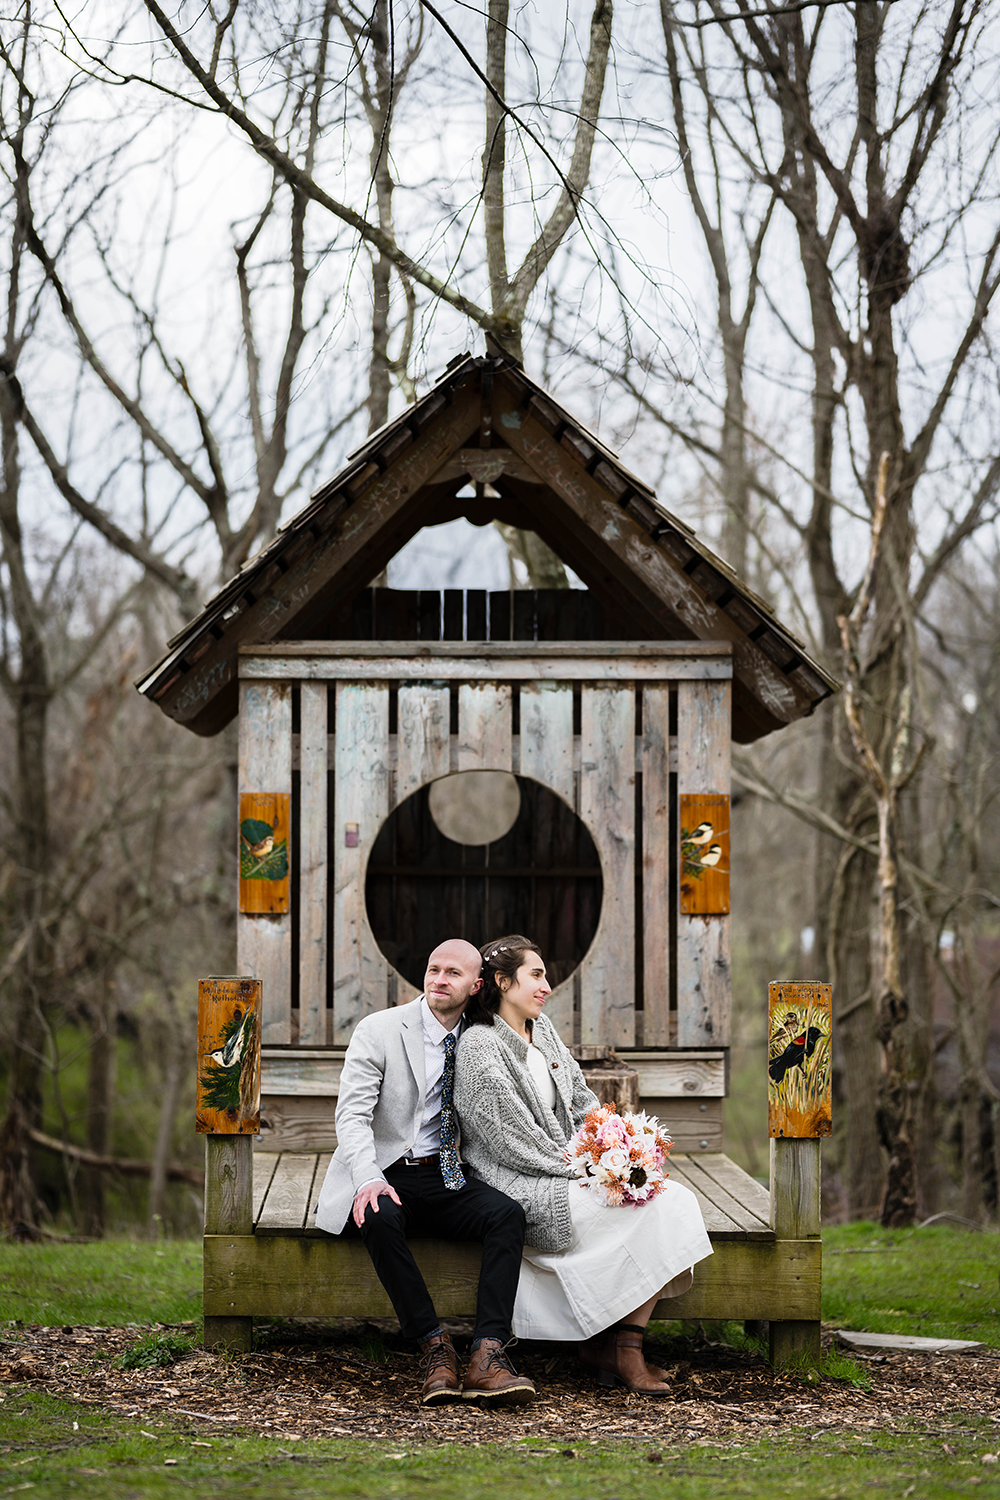 A couple sit together on a structure shaped like an over-sized birdhouse at Heritage Park.